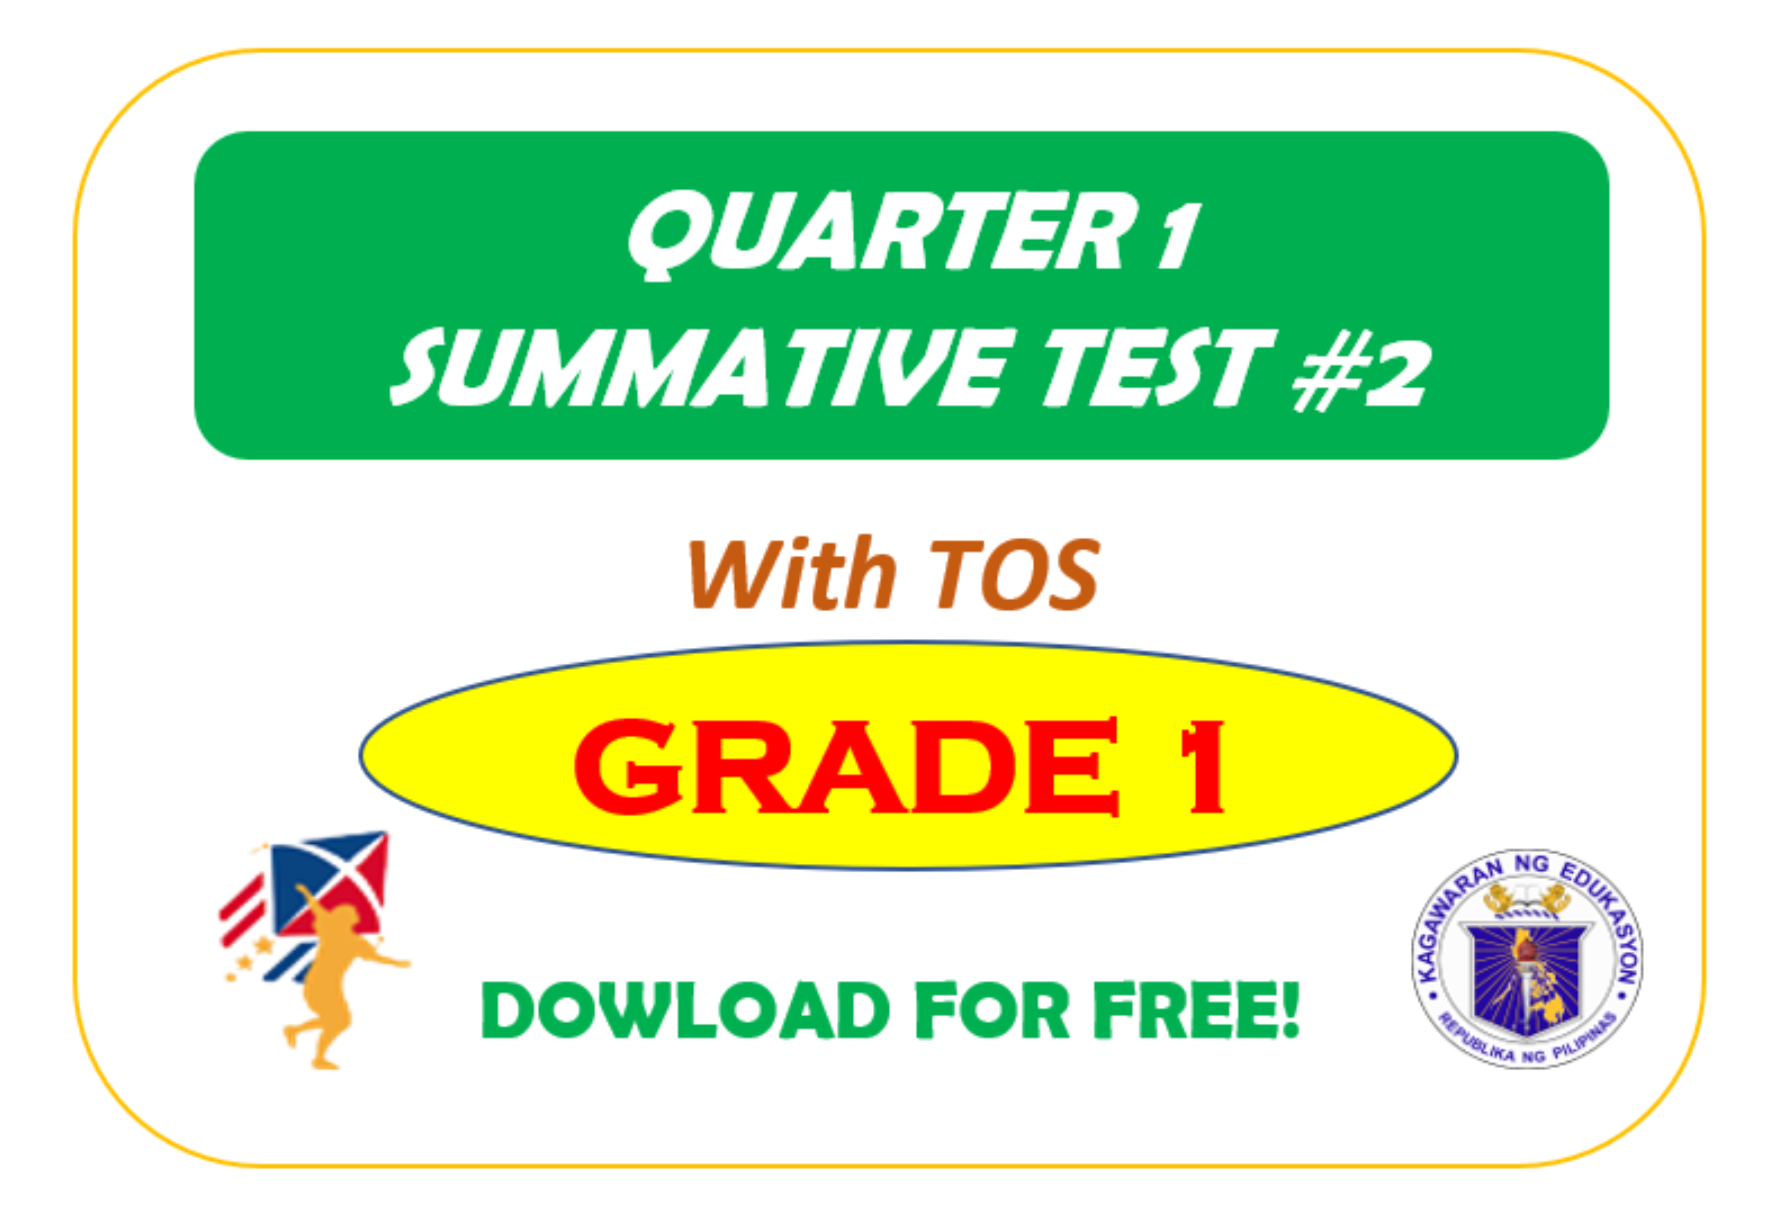 summative assessment with tos